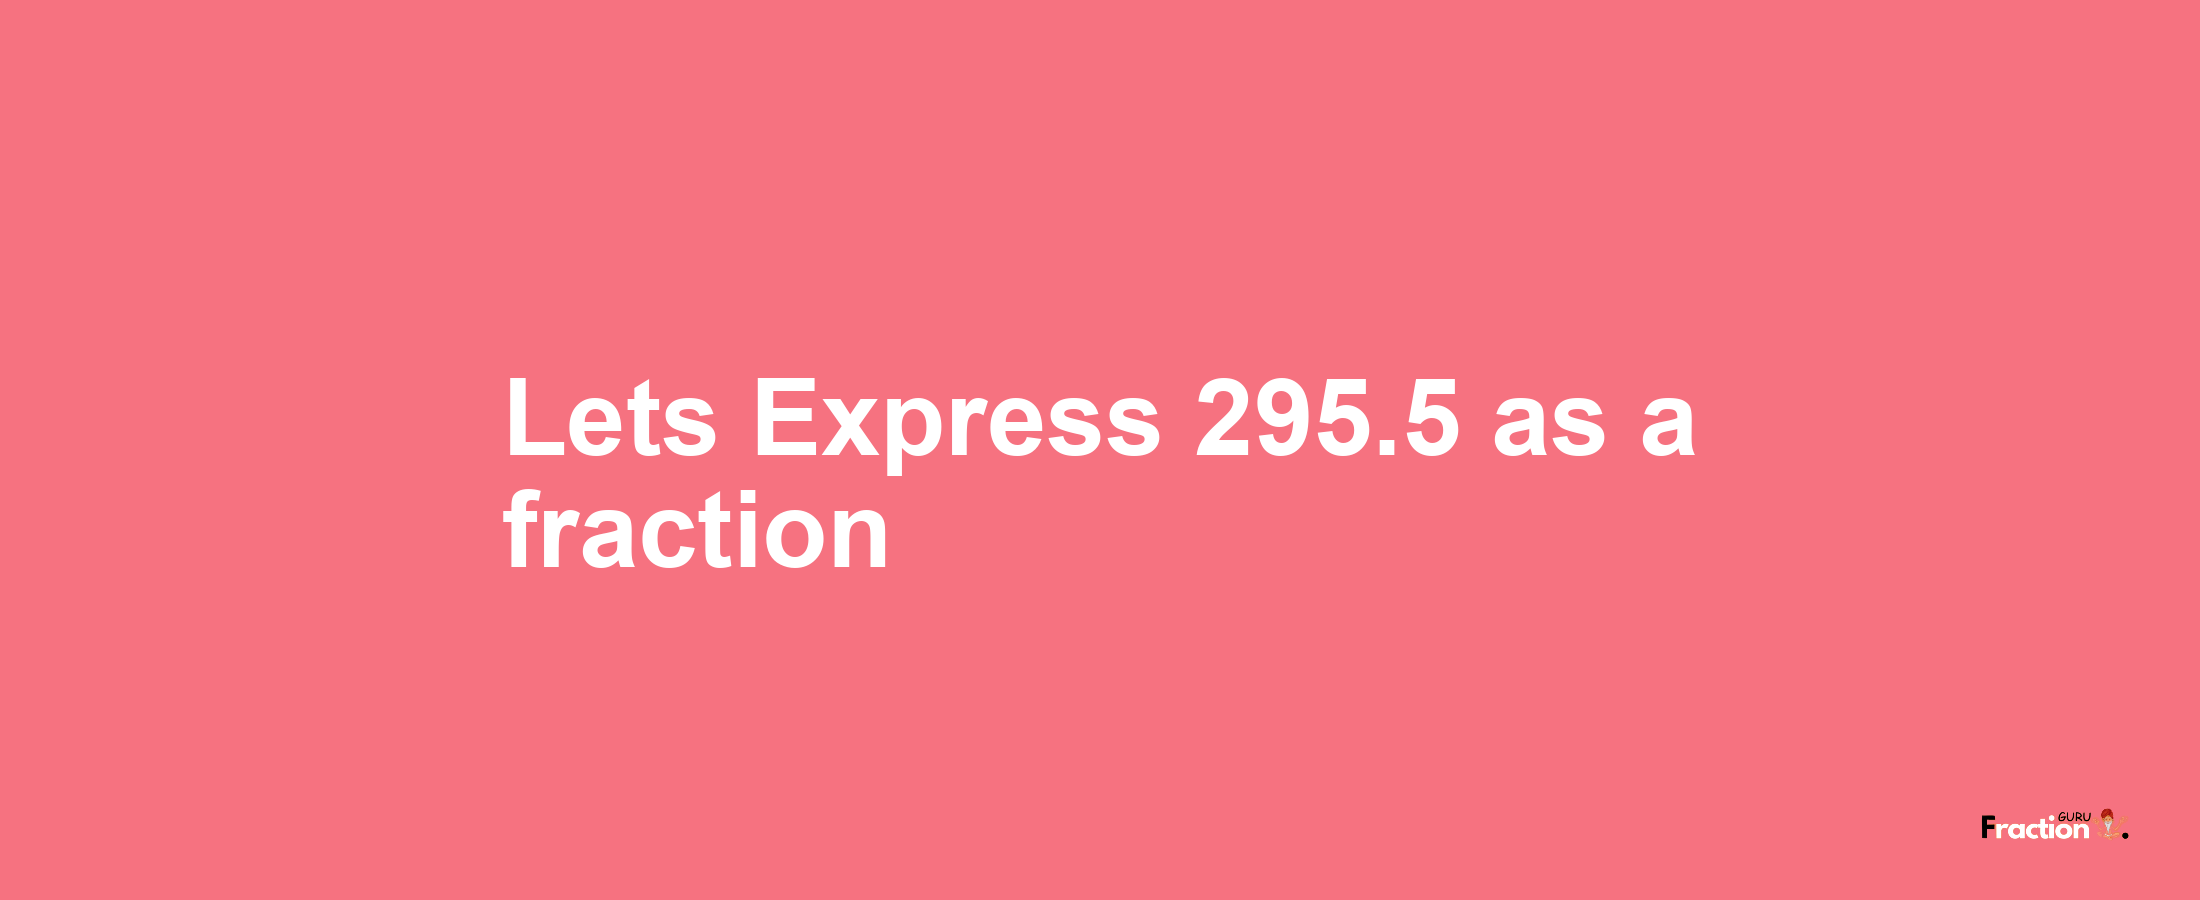 Lets Express 295.5 as afraction